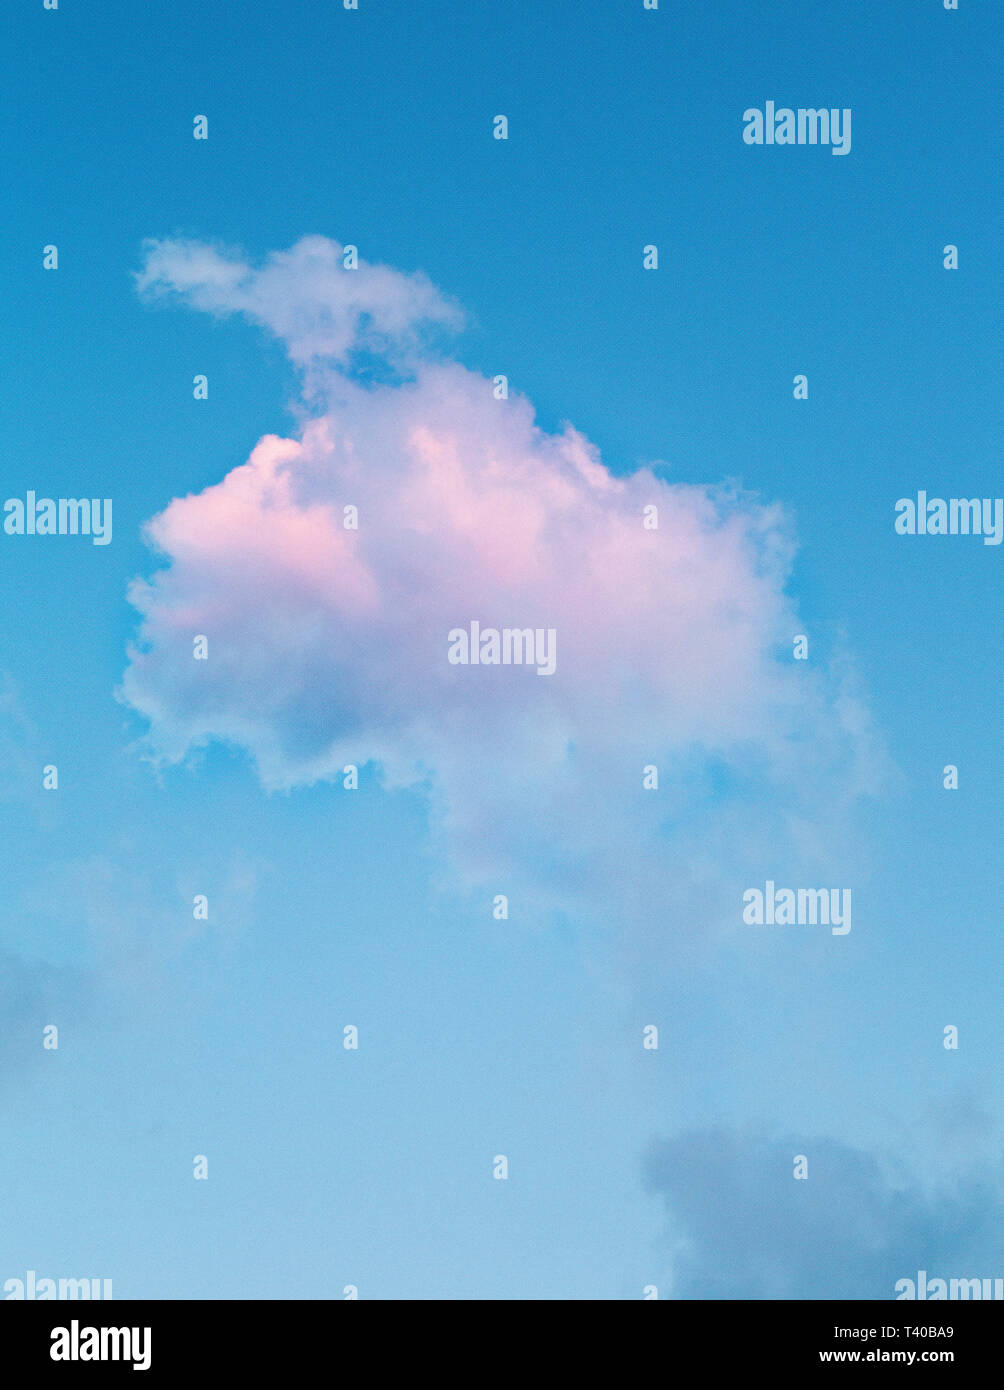 Cotton Clouds Patterned Sky Backgroundly Stock Photo 2247298347